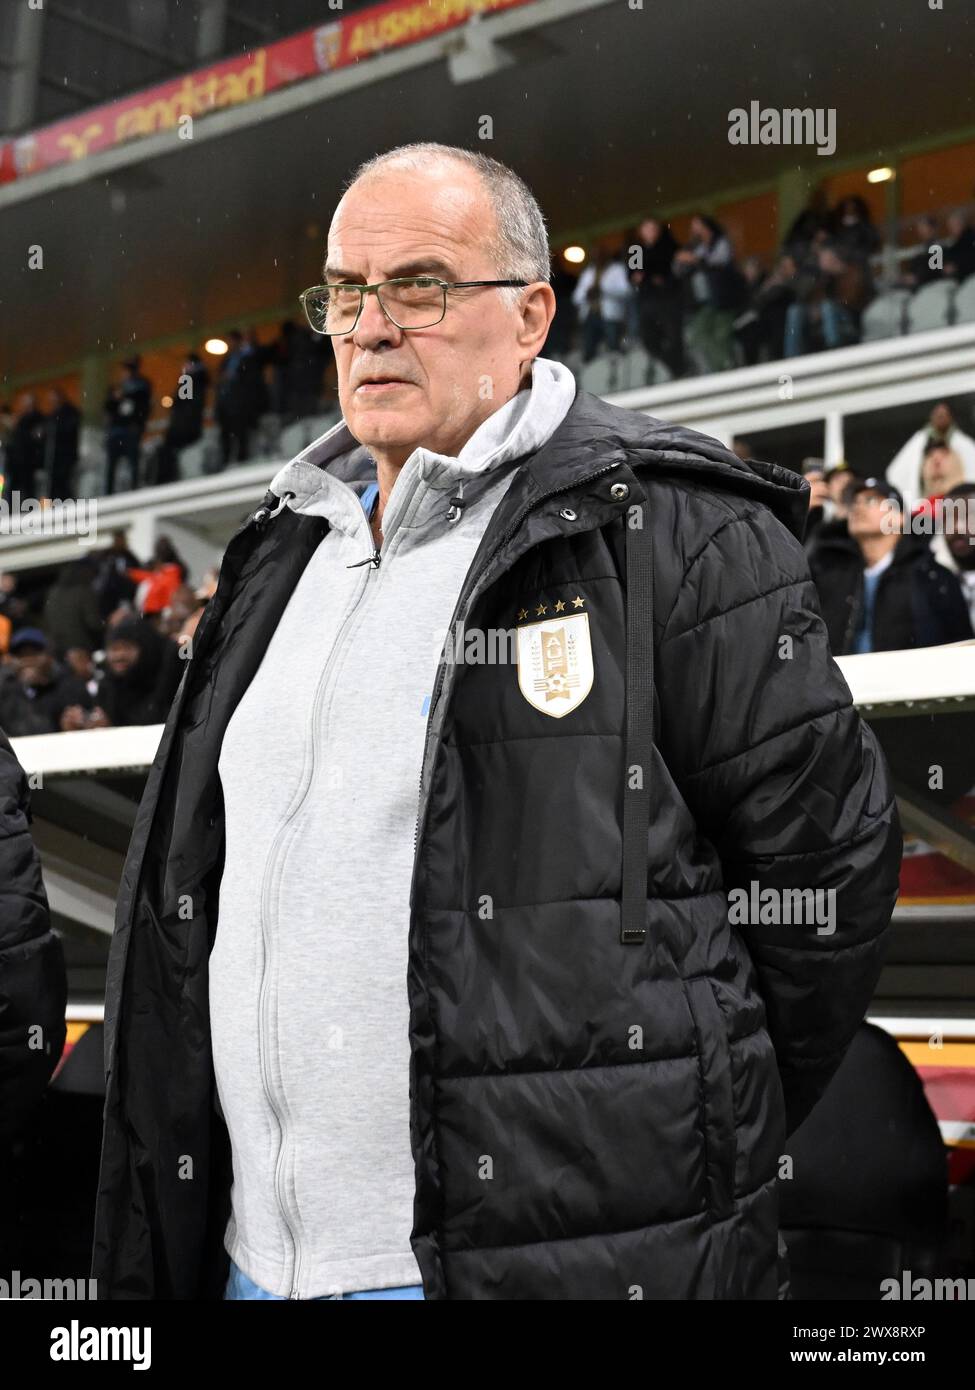 LENS - Uruguay coach Marcelo Bielsa during the friendly Interland match between Ivory Coast and Uruguay at Stade Bollaert Delelis on March 26, 2024 in Lens, France. ANP | Hollandse Hoogte | GERRIT VAN COLOGNE Stock Photo